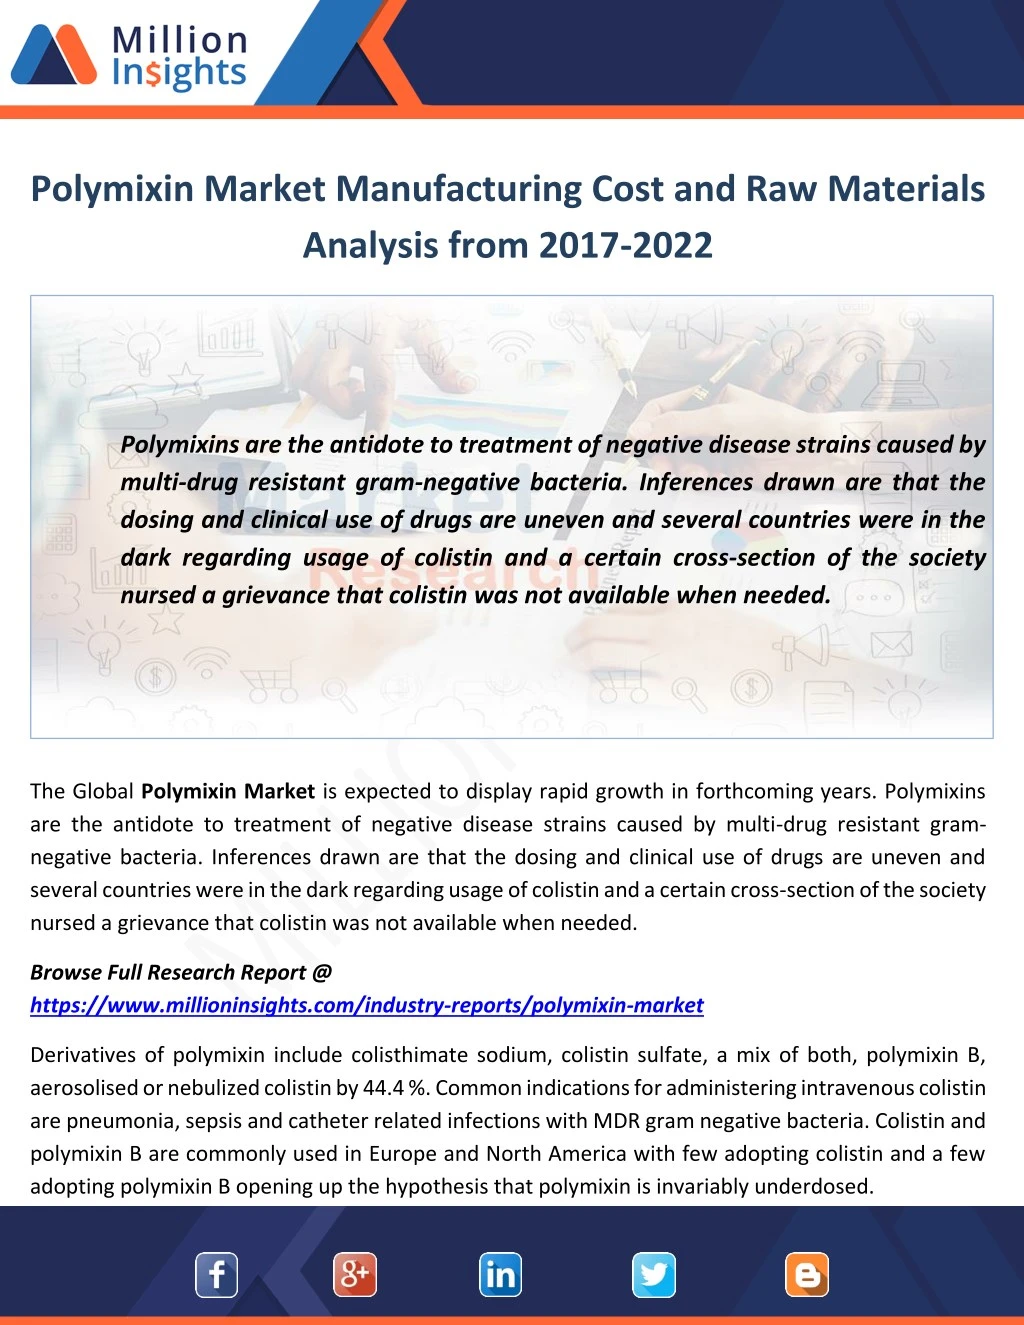 polymixin market manufacturing cost